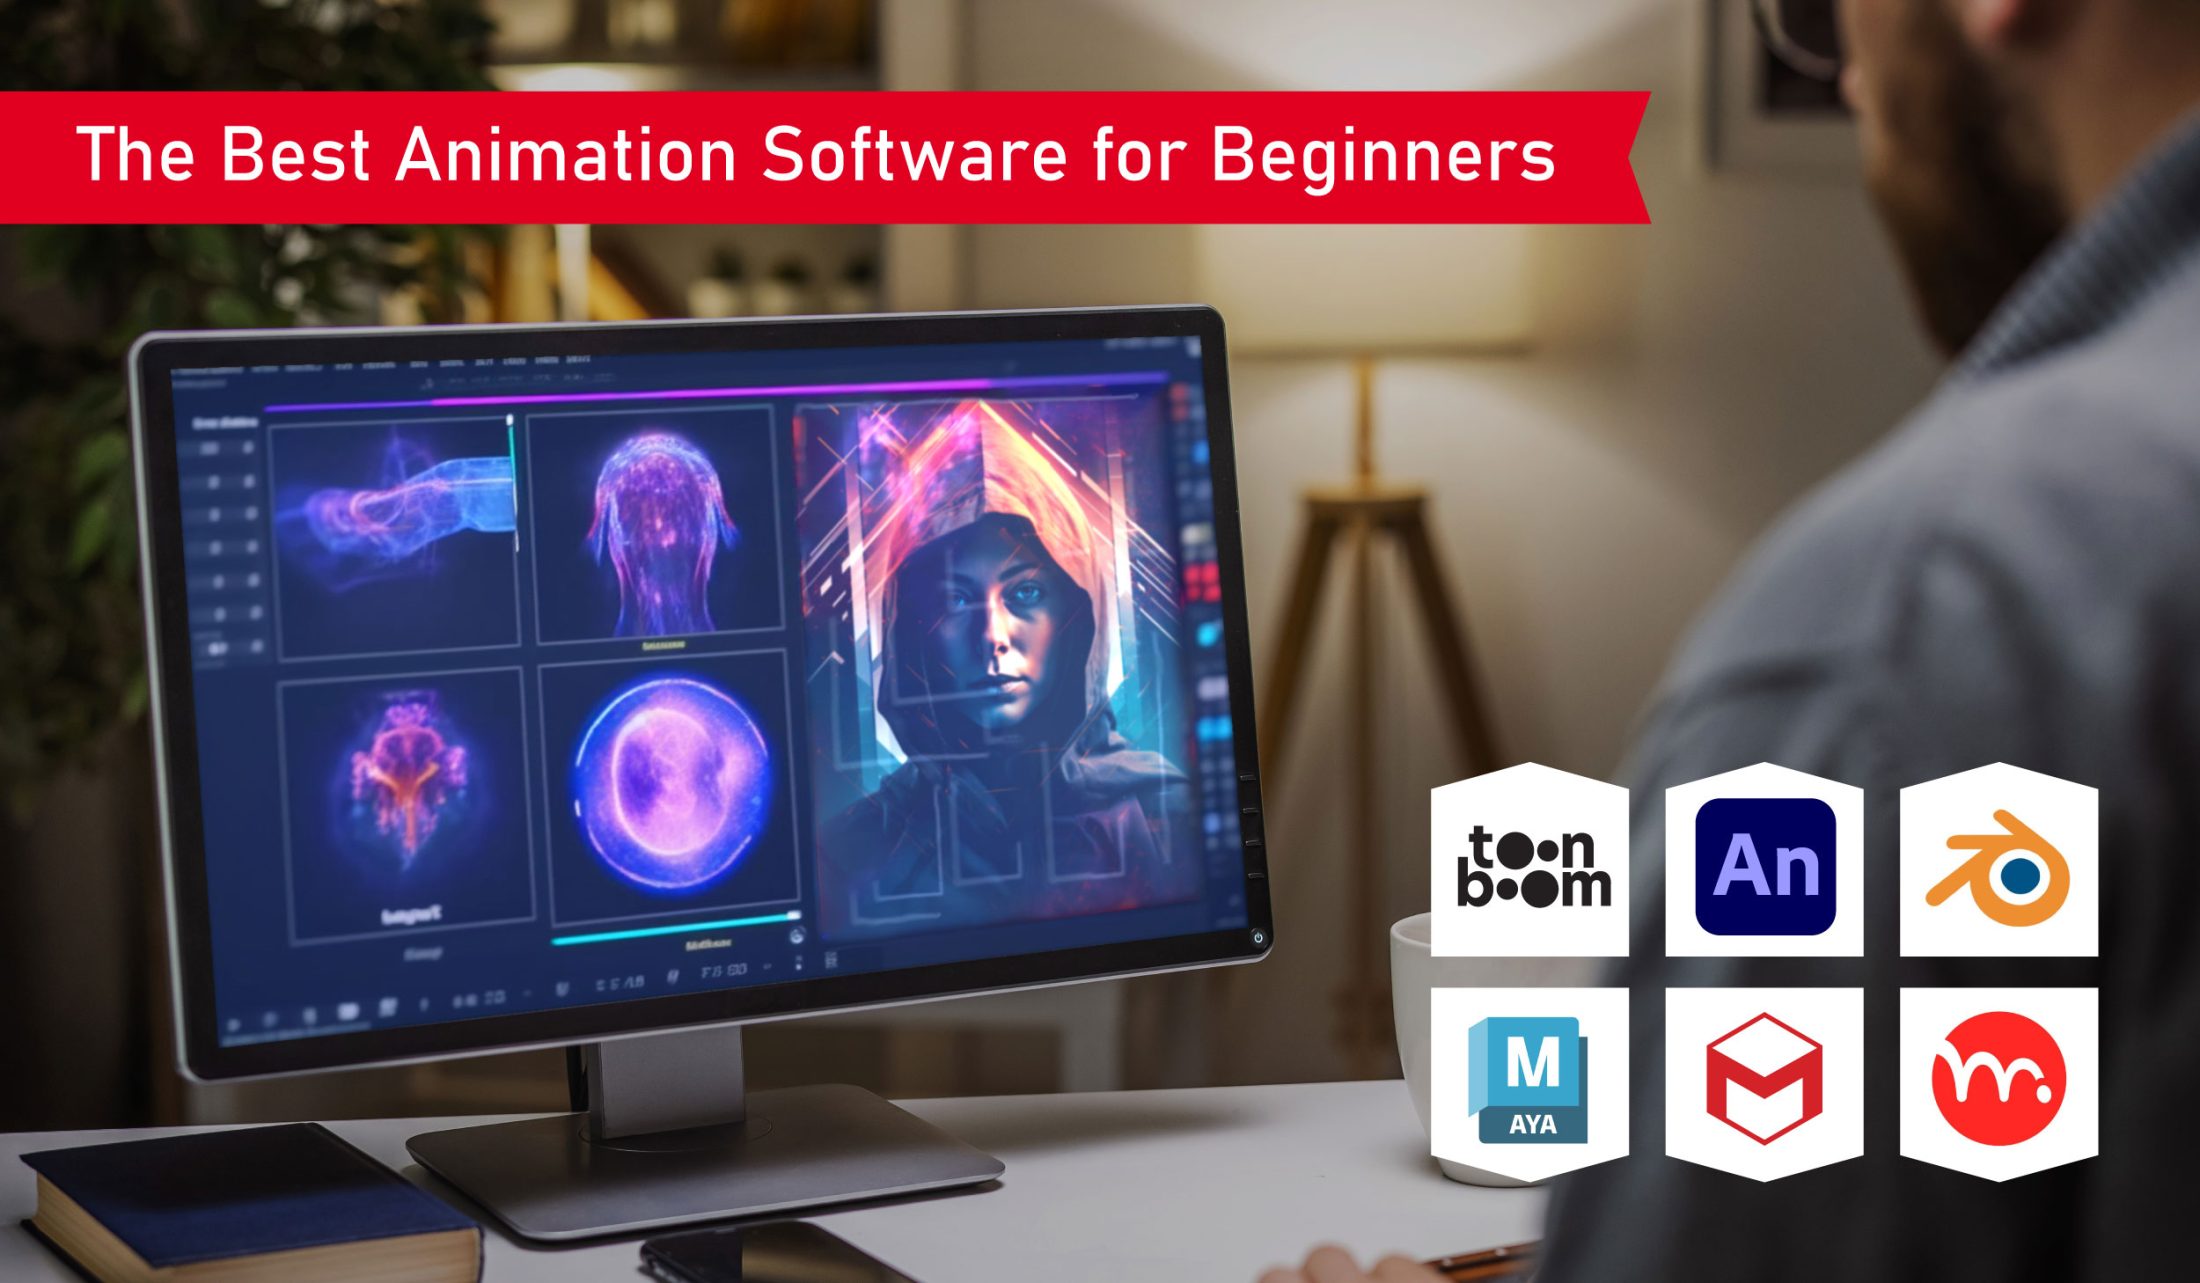 The Best Animation Software for Beginners